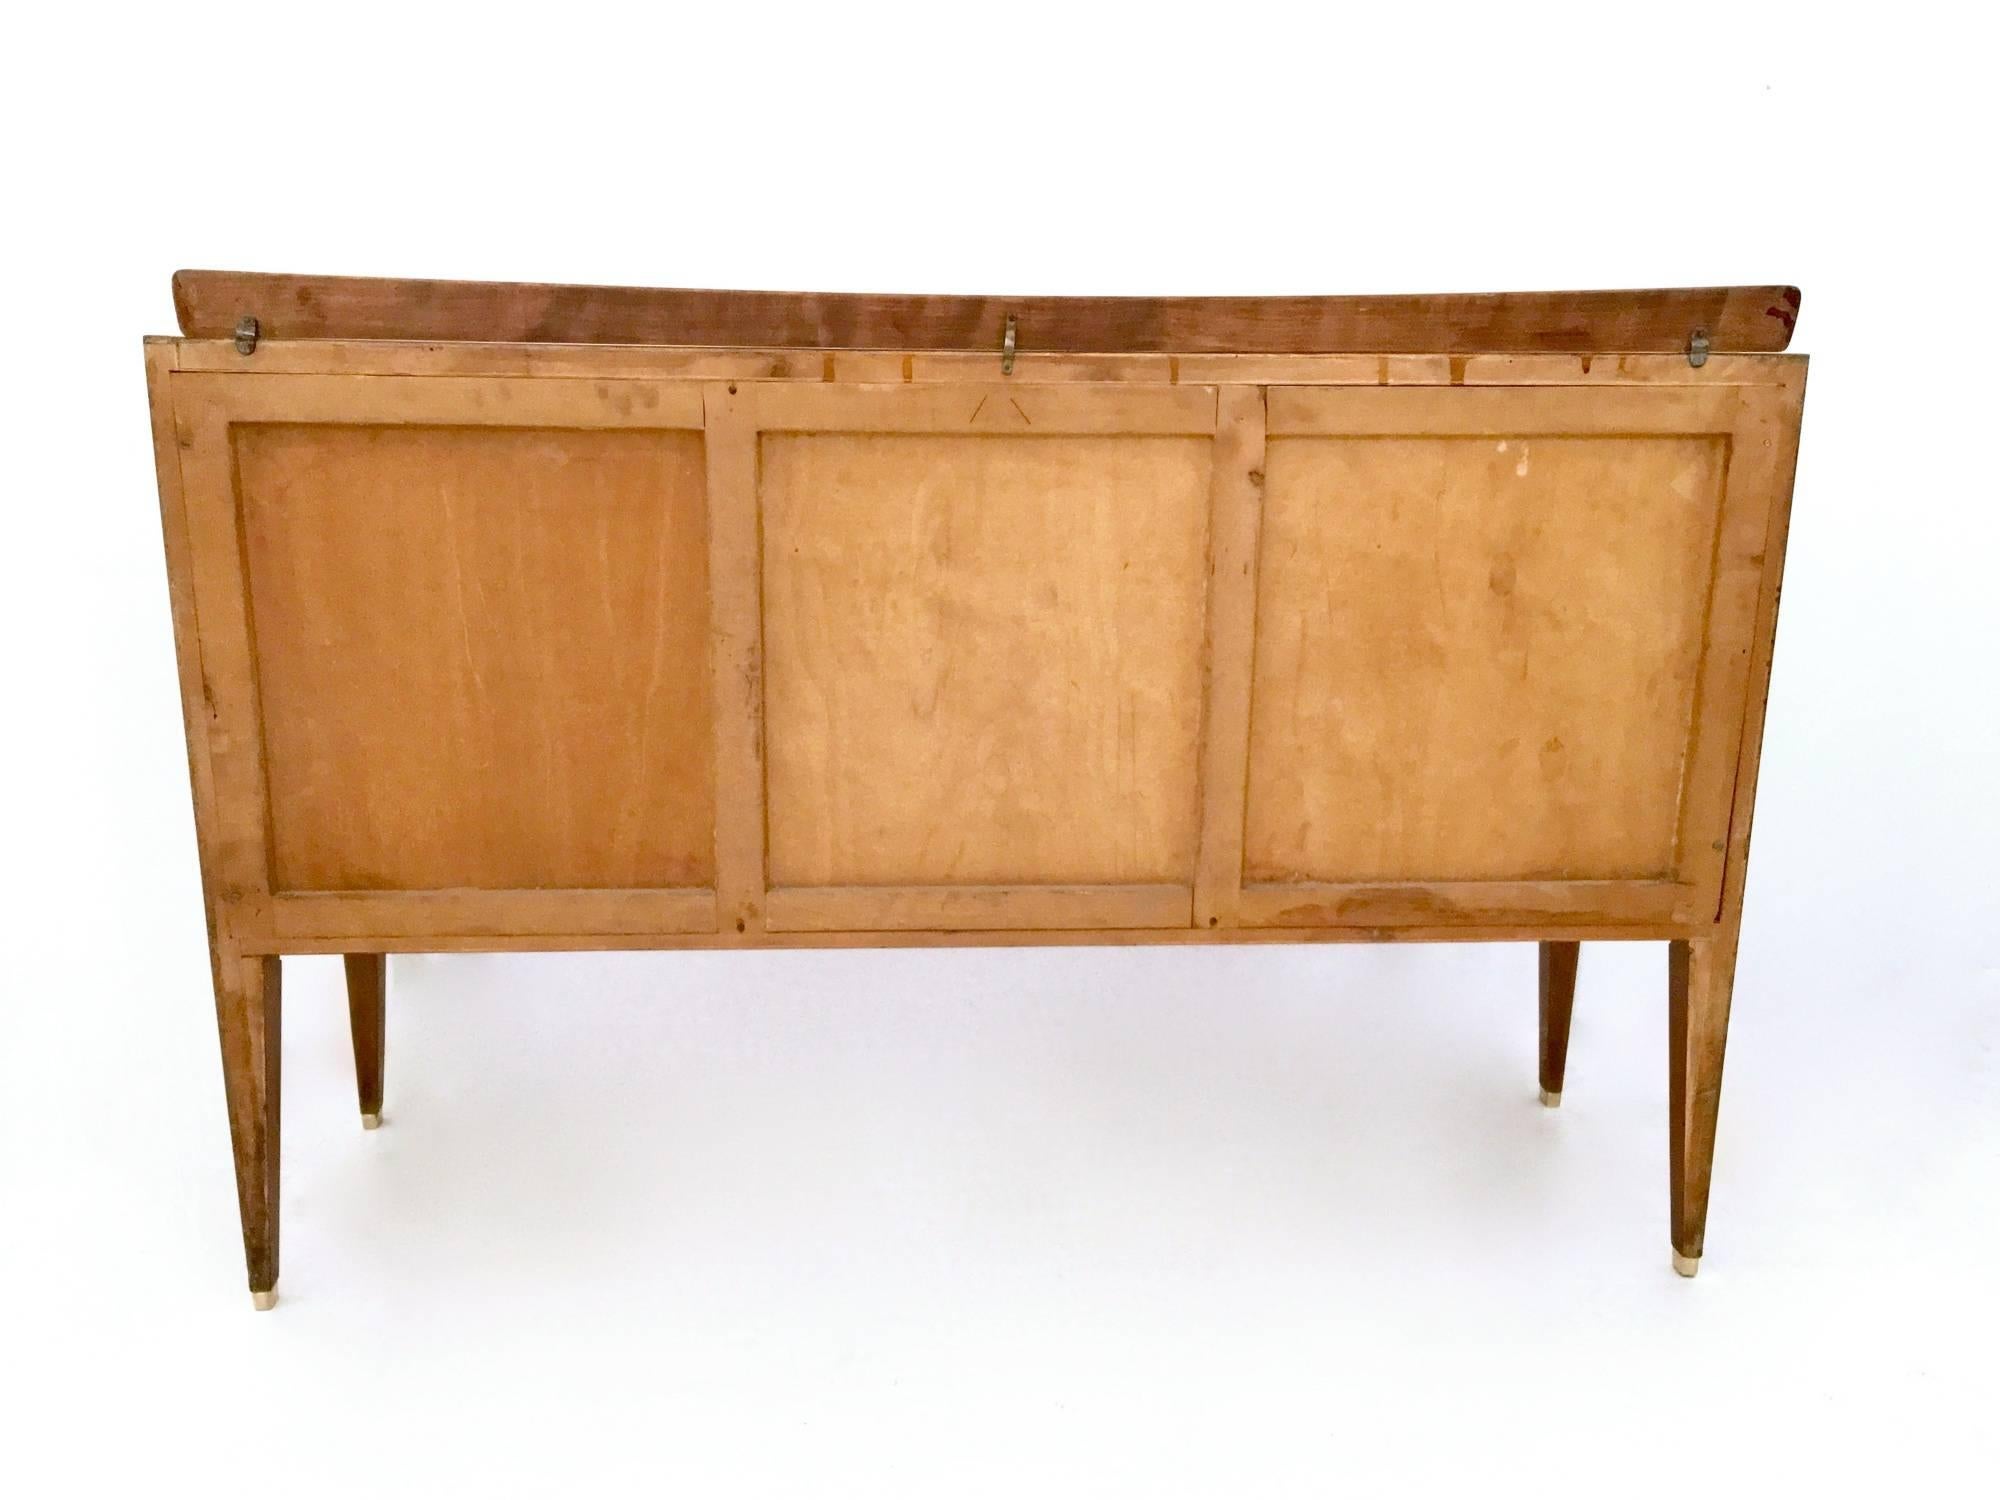 Mid-20th Century Walnut Sideboard in the Style of Gio Ponti with Maple Interiors, Italy, 1950s